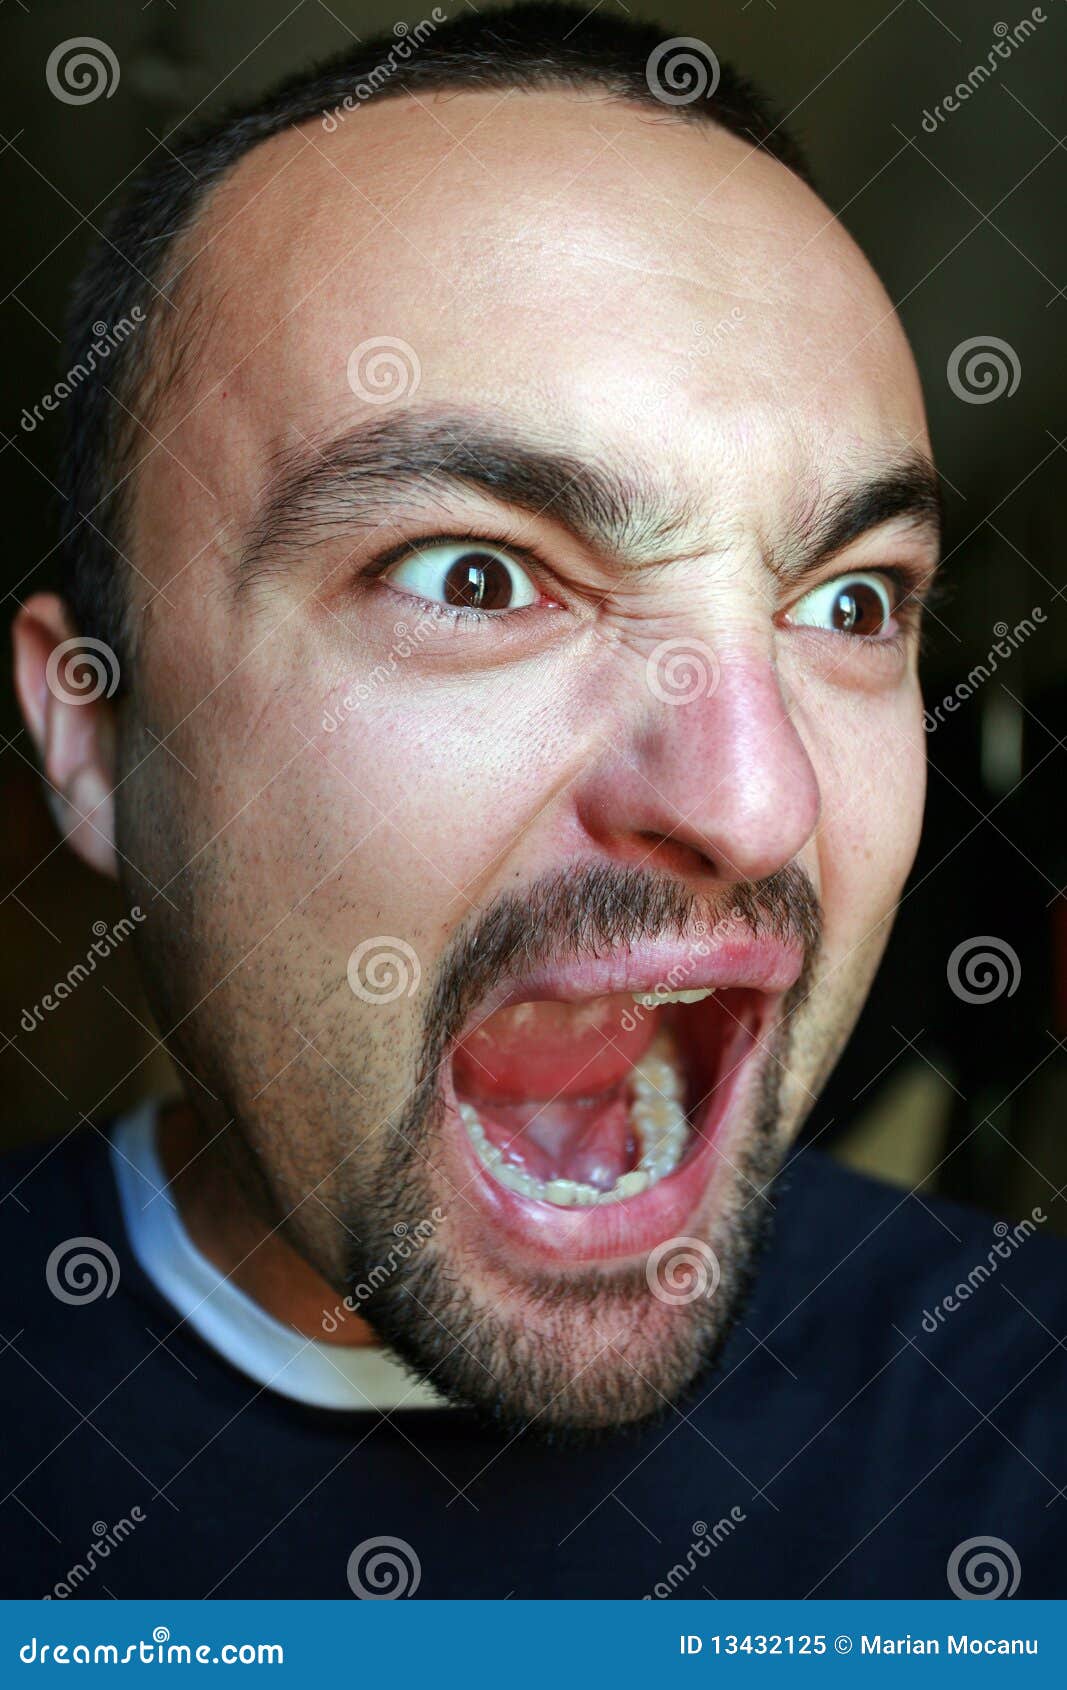 Man screming stock image. Image of action, look, portrait - 13432125